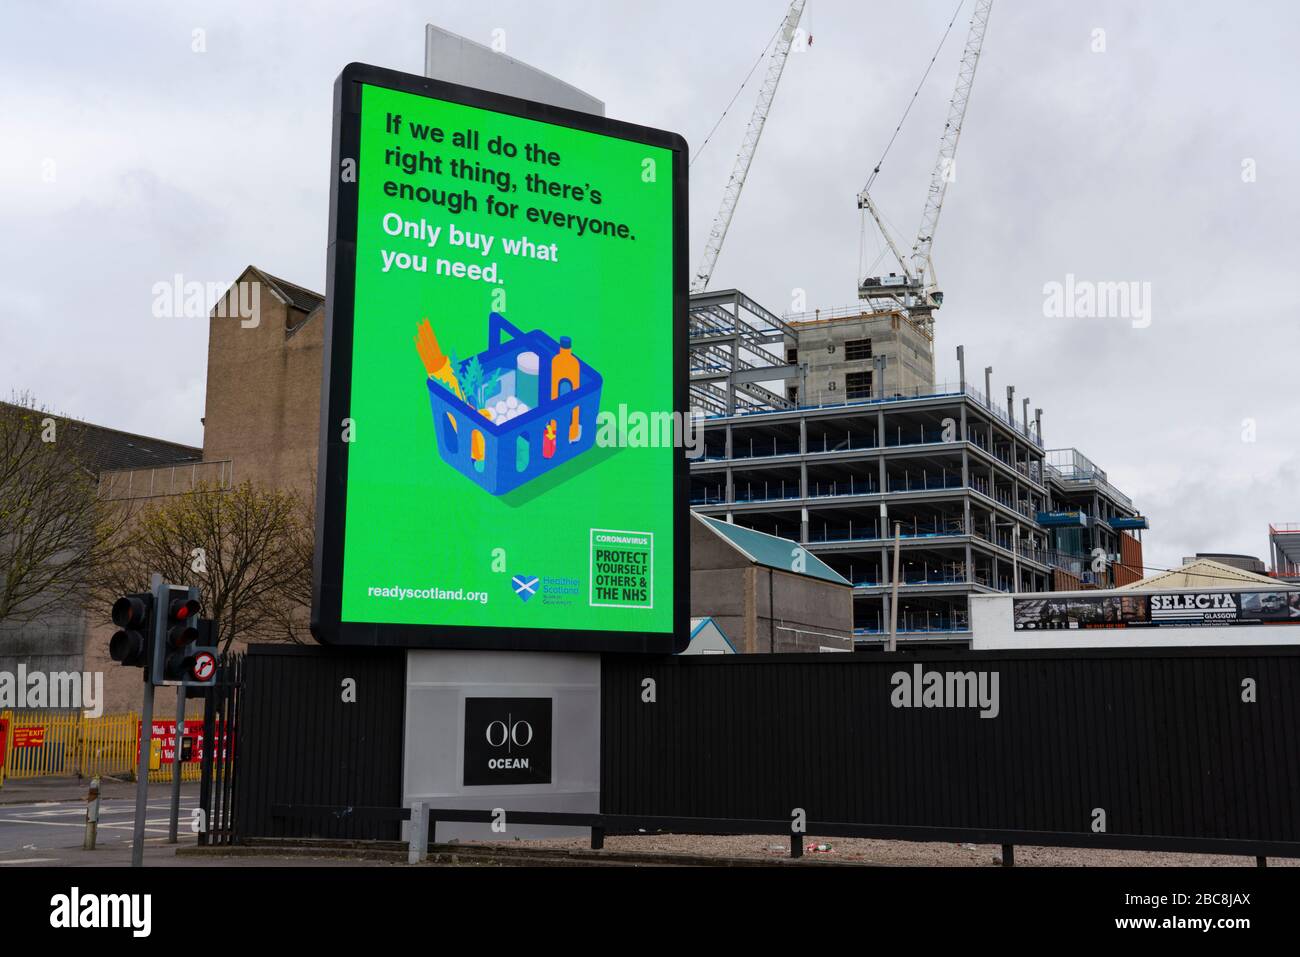 Glasgow, Scotland, UK. 3 April, 2020. Images from the south side of Glasgow at the end of the second week of Coronavirus lockdown. Large video screen in Tradeston with public information message about hoarding food during coronavirus pandemic. Iain Masterton/Alamy Live News Stock Photo